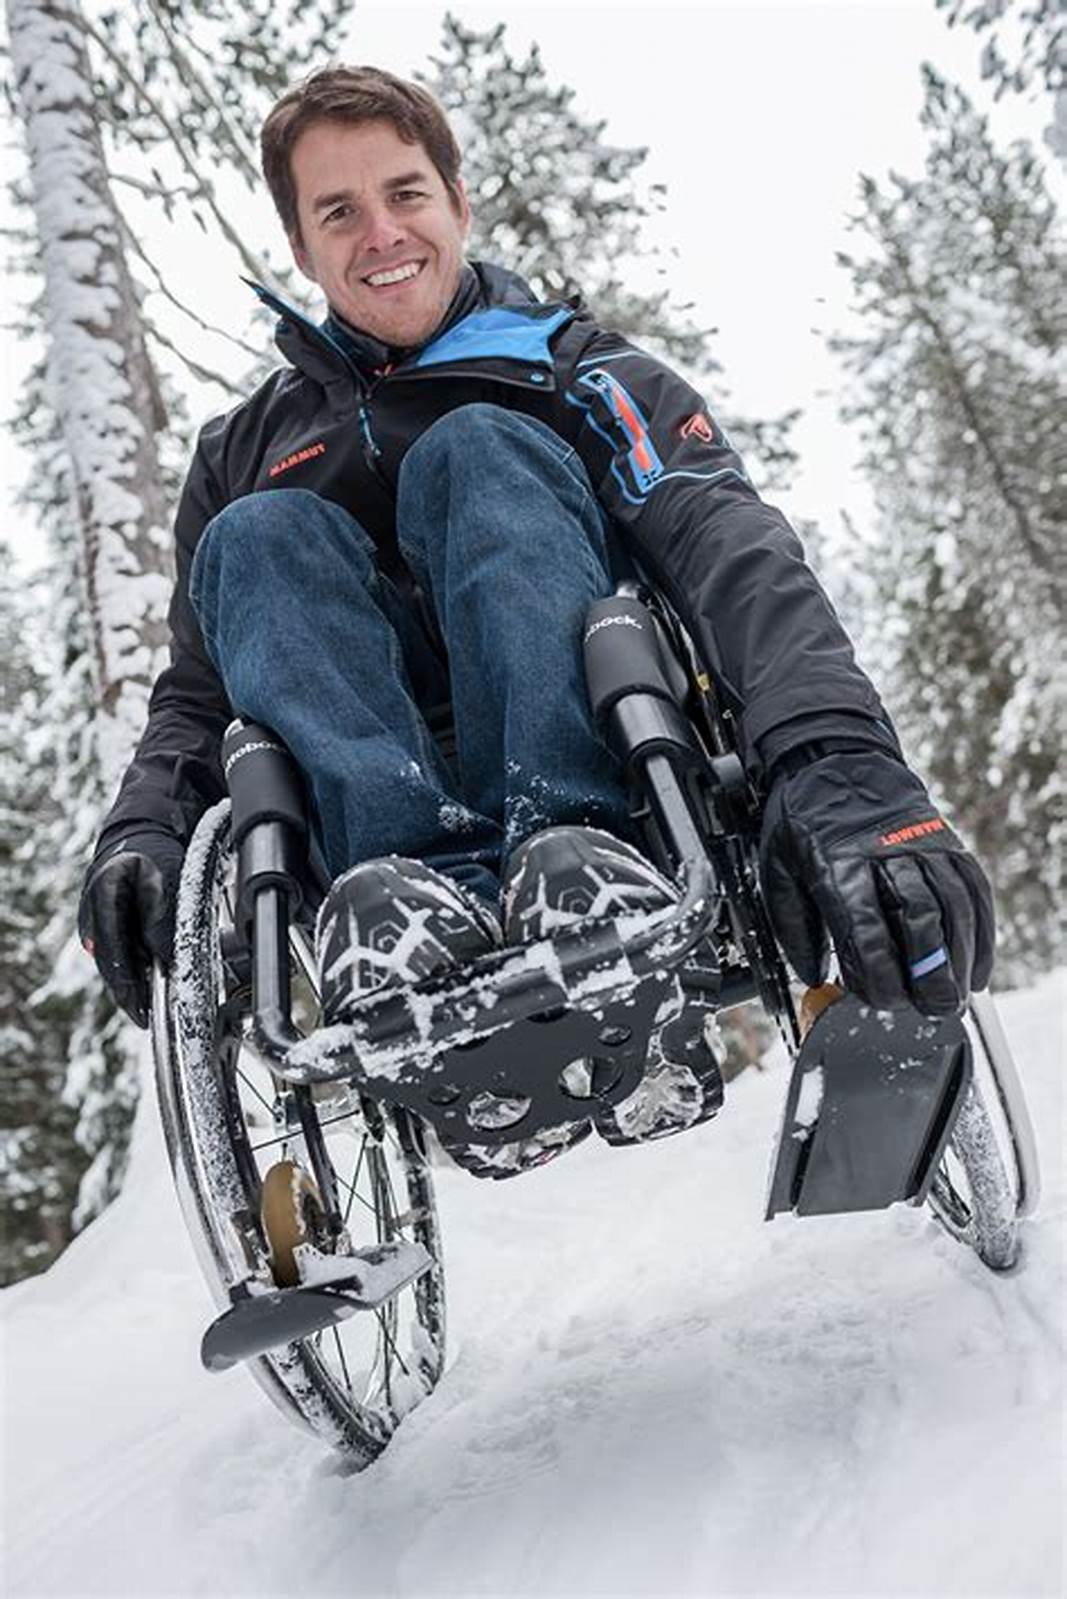 Ice and Snow Won’t Stop Me from Where I Want To Go: Assistive Technology for Ice and Snow